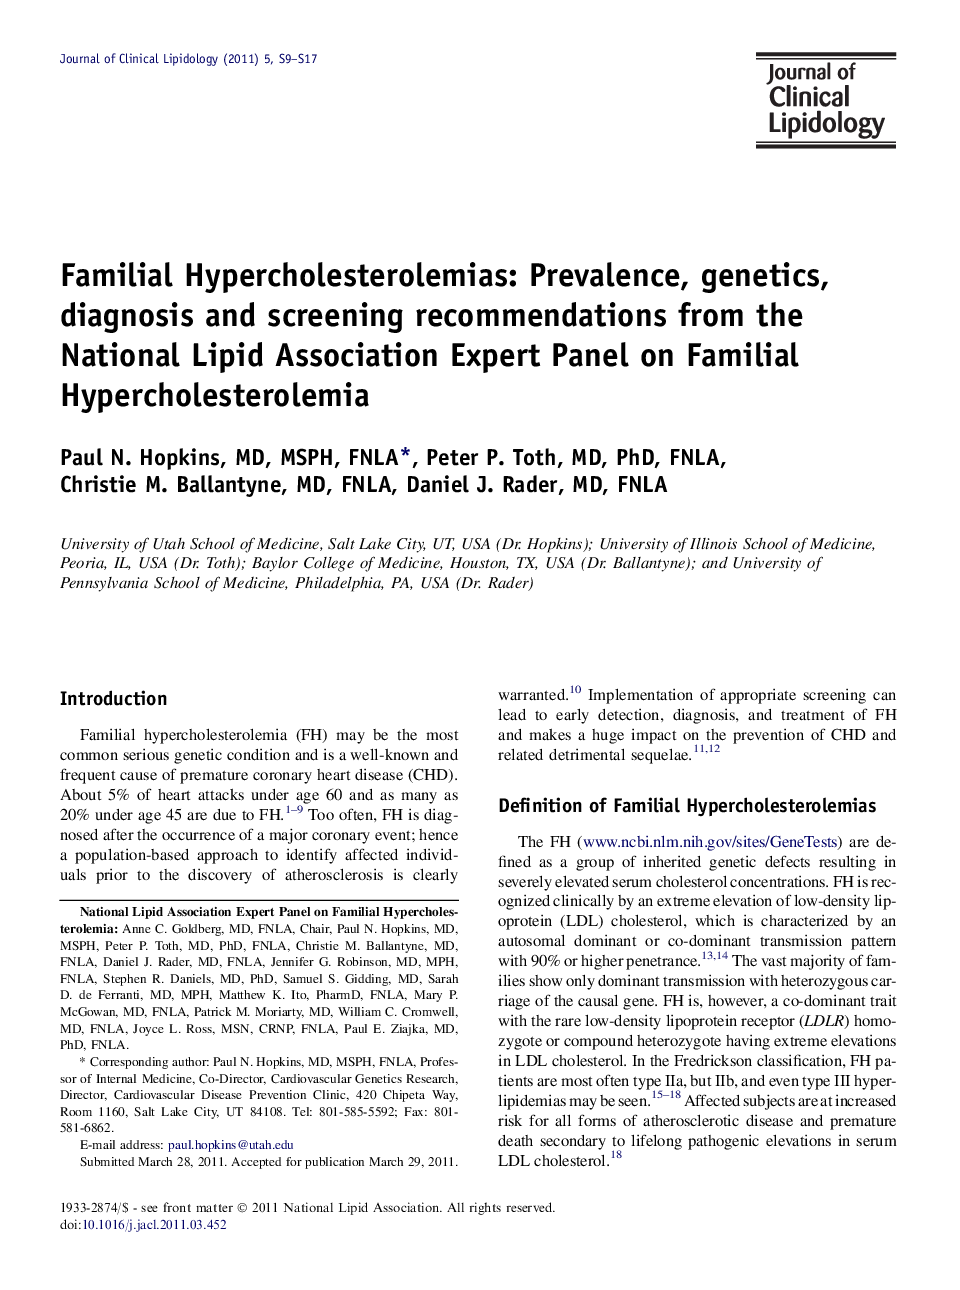 Familial Hypercholesterolemias: Prevalence, genetics, diagnosis and screening recommendations from the National Lipid Association Expert Panel on Familial Hypercholesterolemia